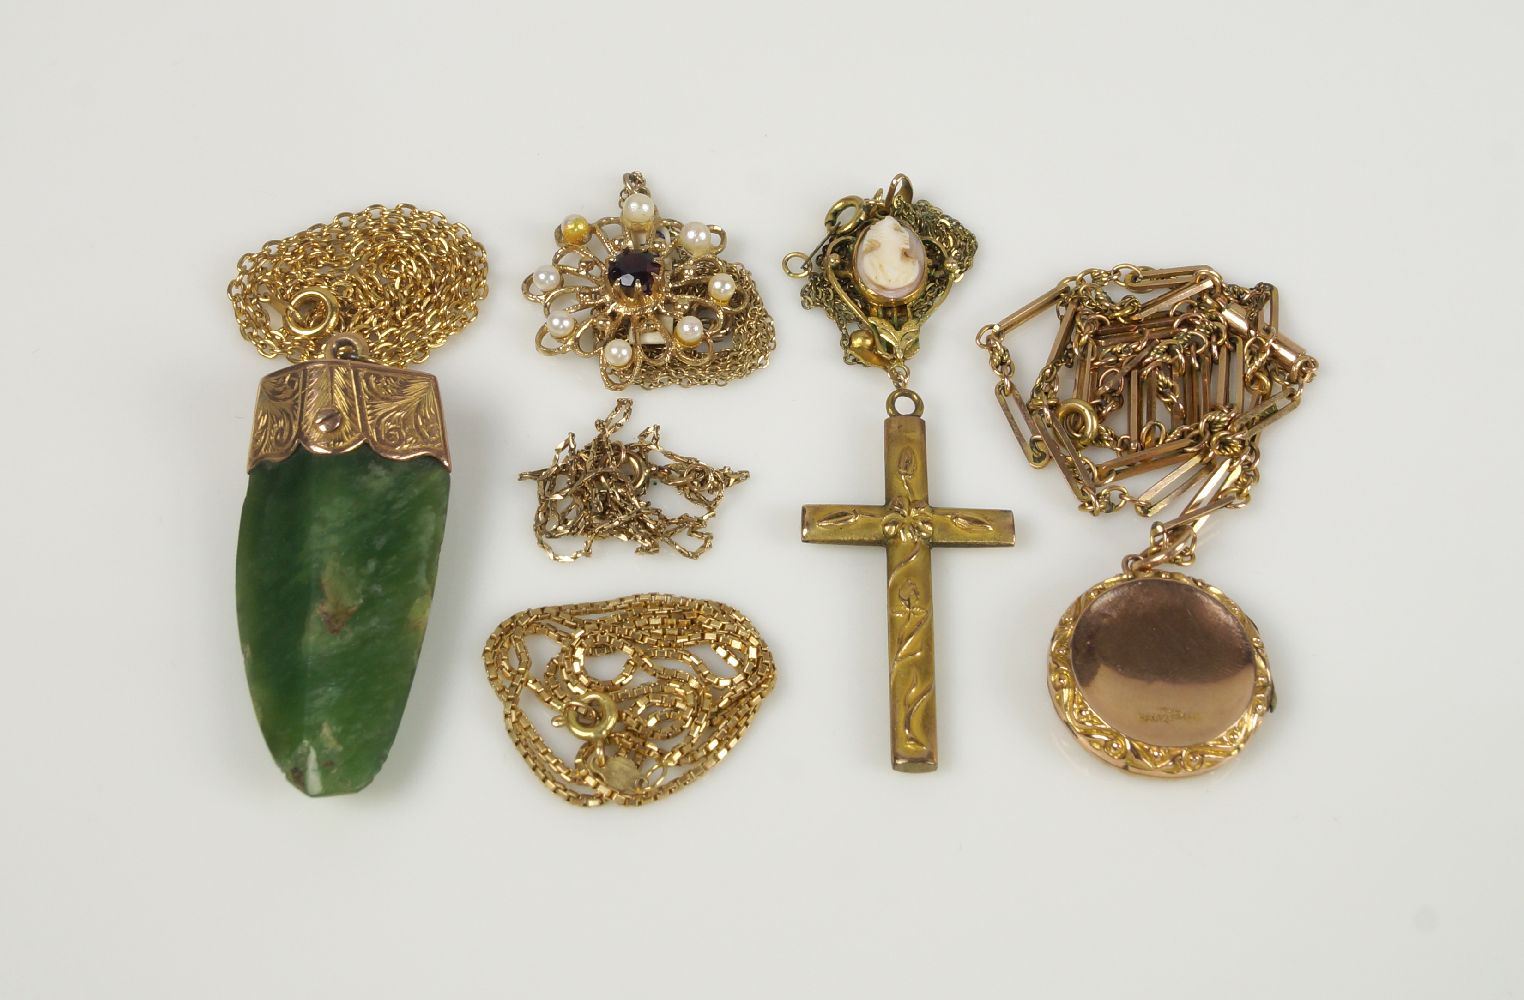 A collection of jewelleryComprising: a gold fetter-link neckchain suspending a rolled gold locket